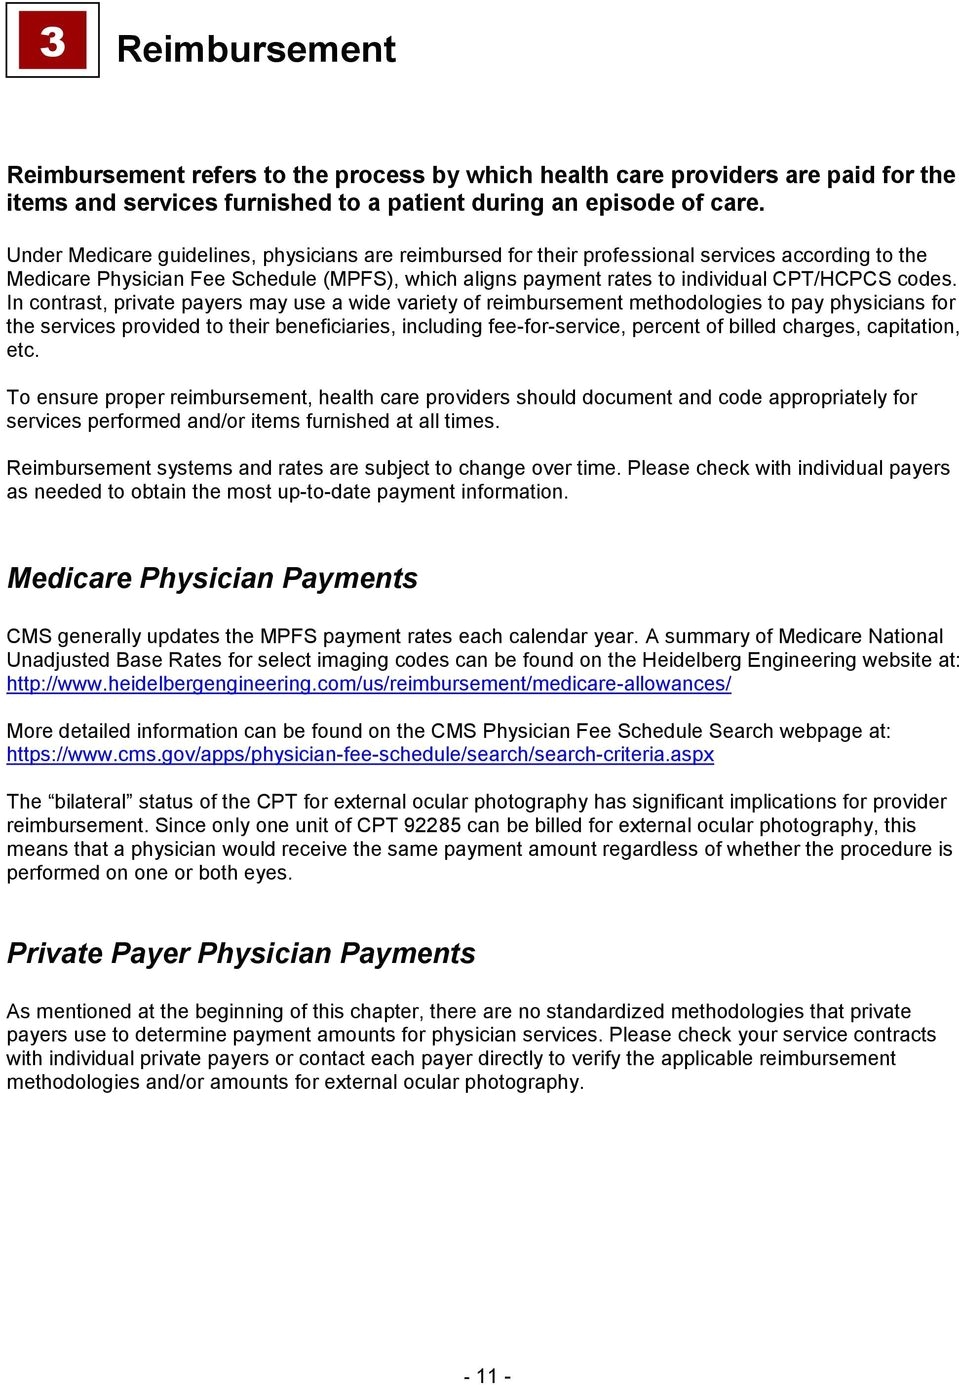 in contrast private payers may use a wide variety of reimbursement methodologies to pay physicians